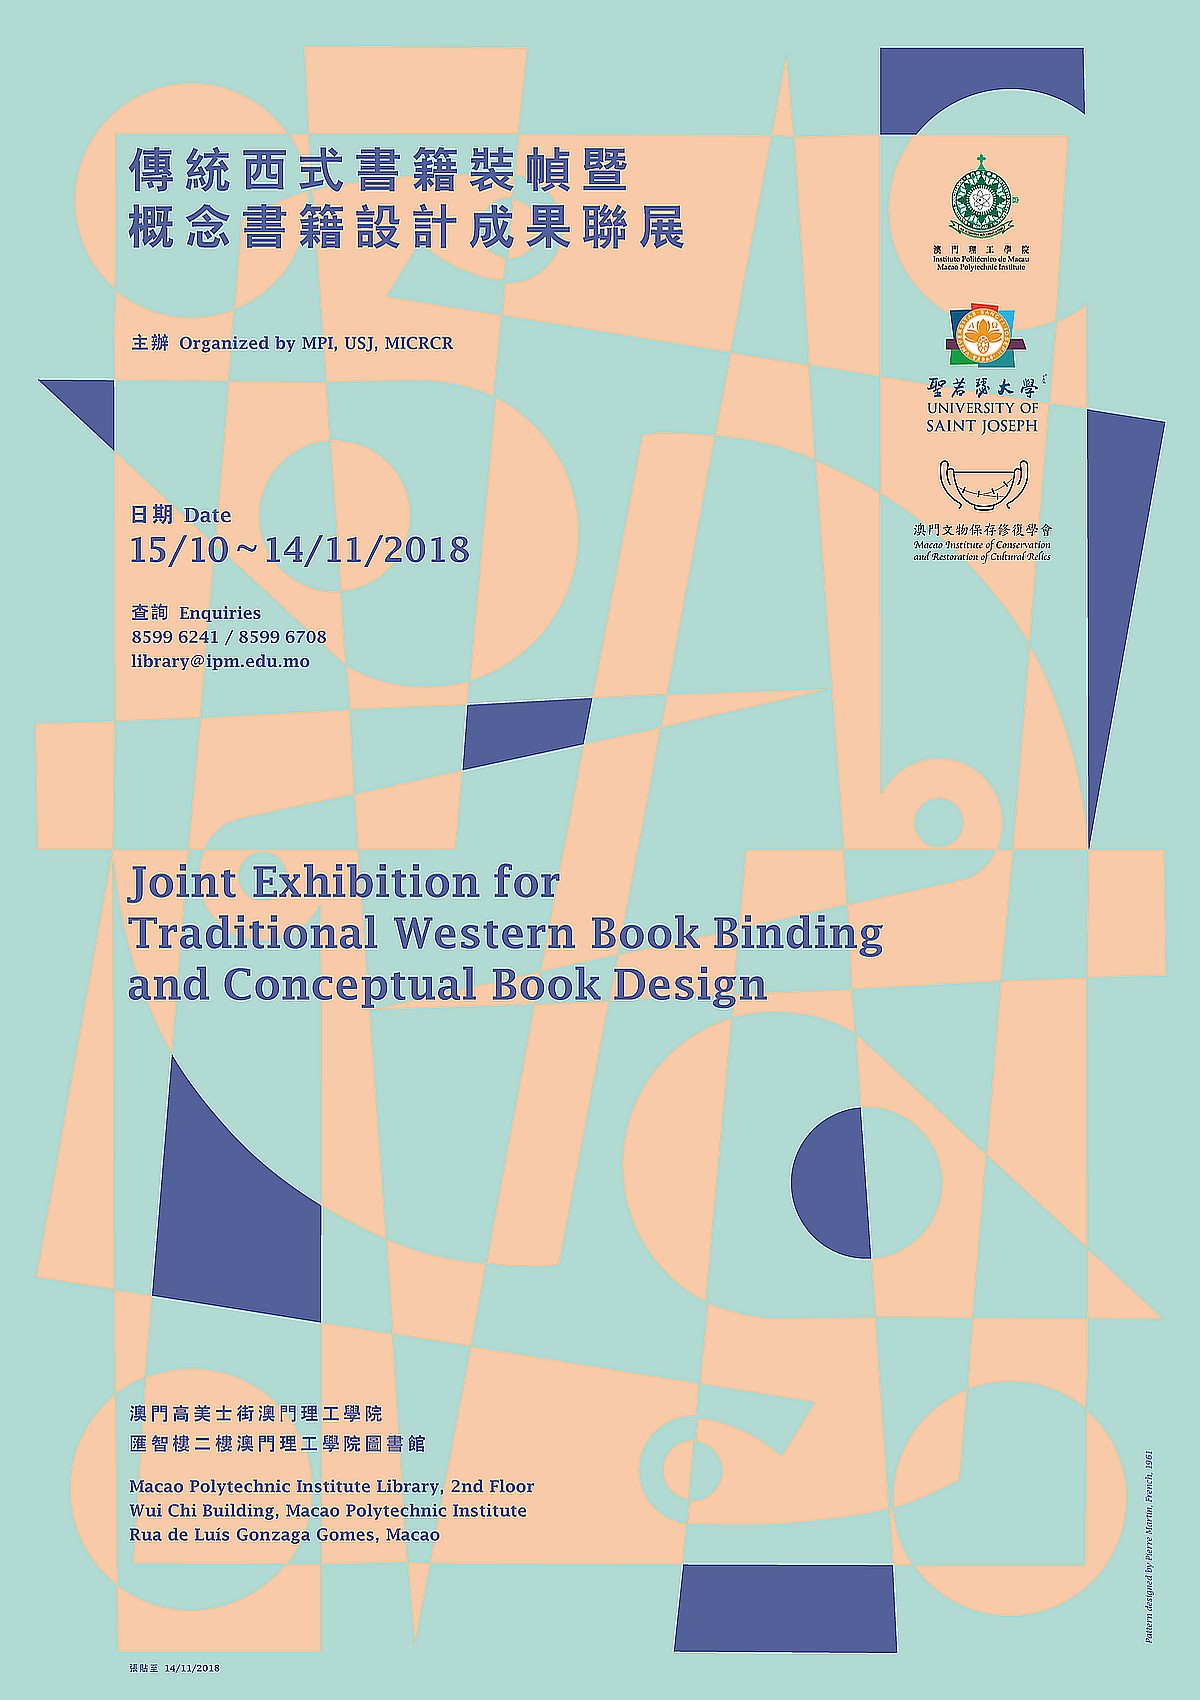 Joint Exhibition for Traditional Western Book Binding and Conceptual Book Design